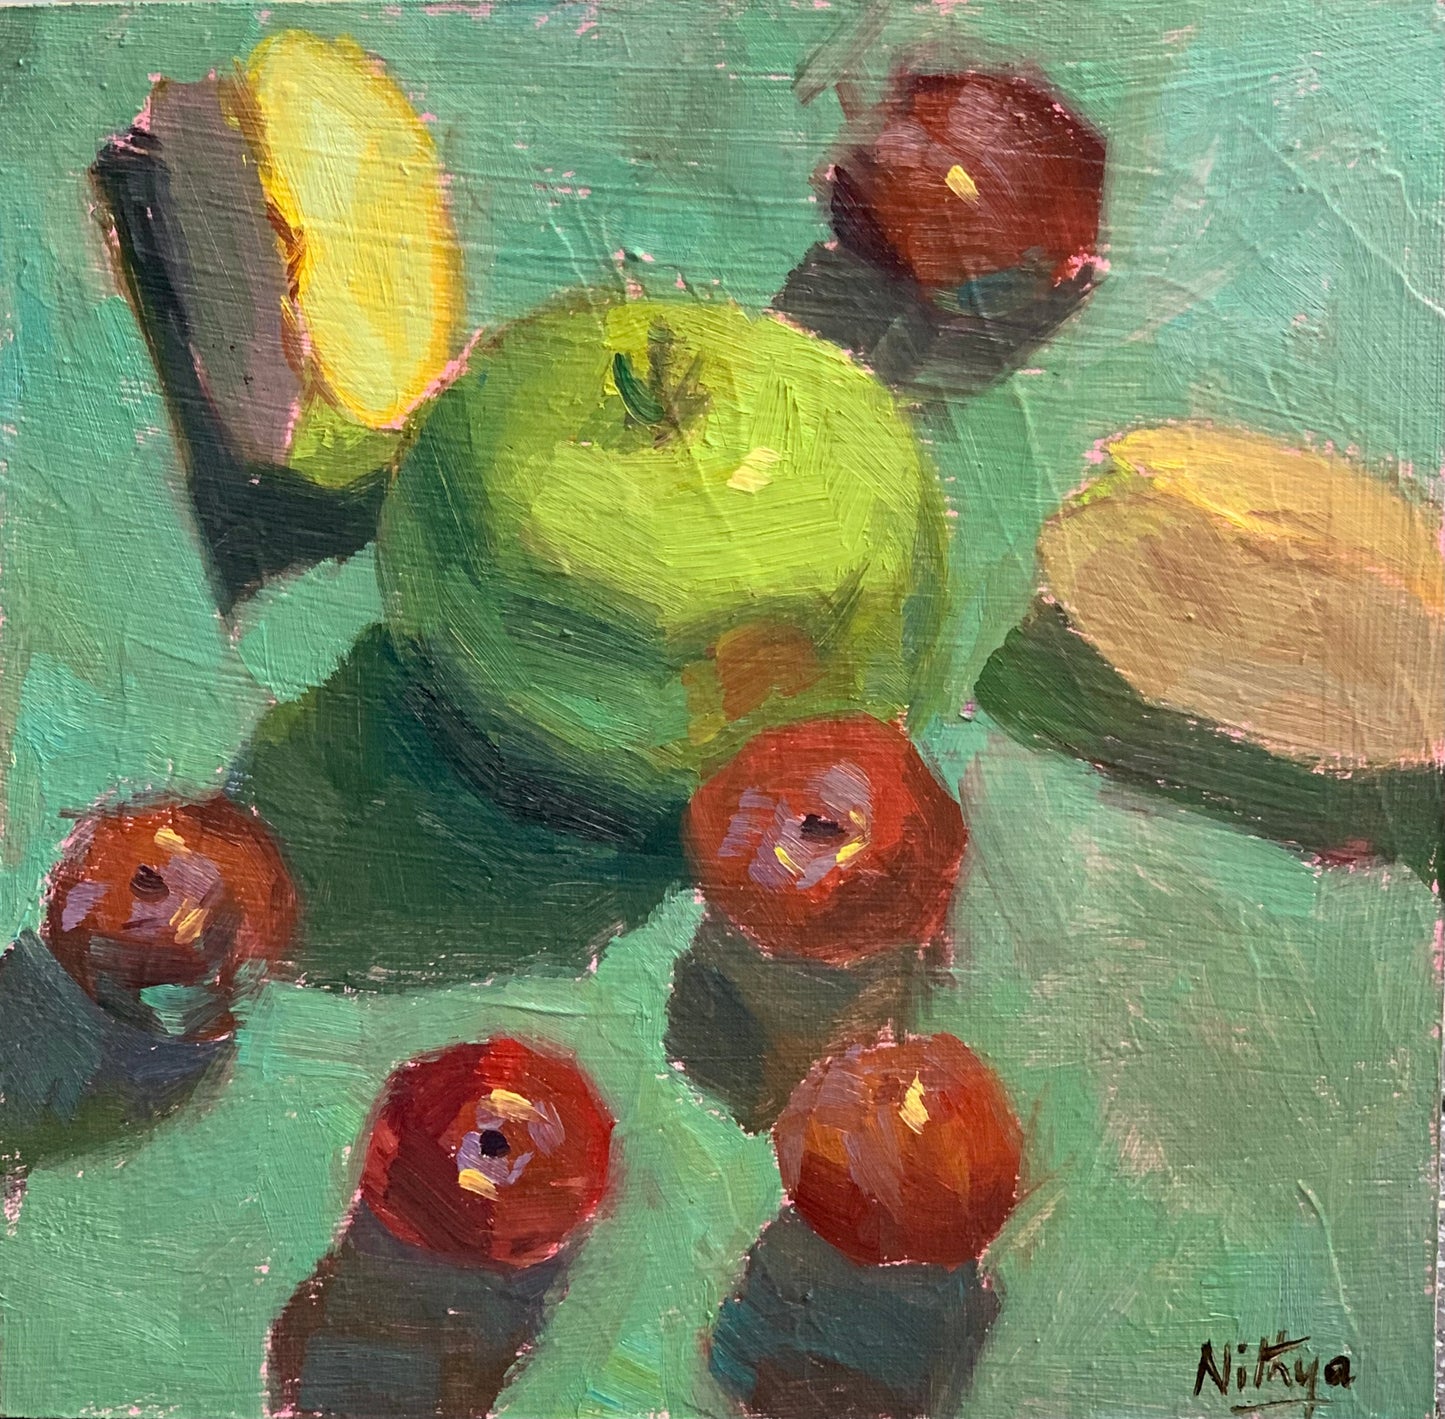 Apples and Plums 2 - Original Oil Painting